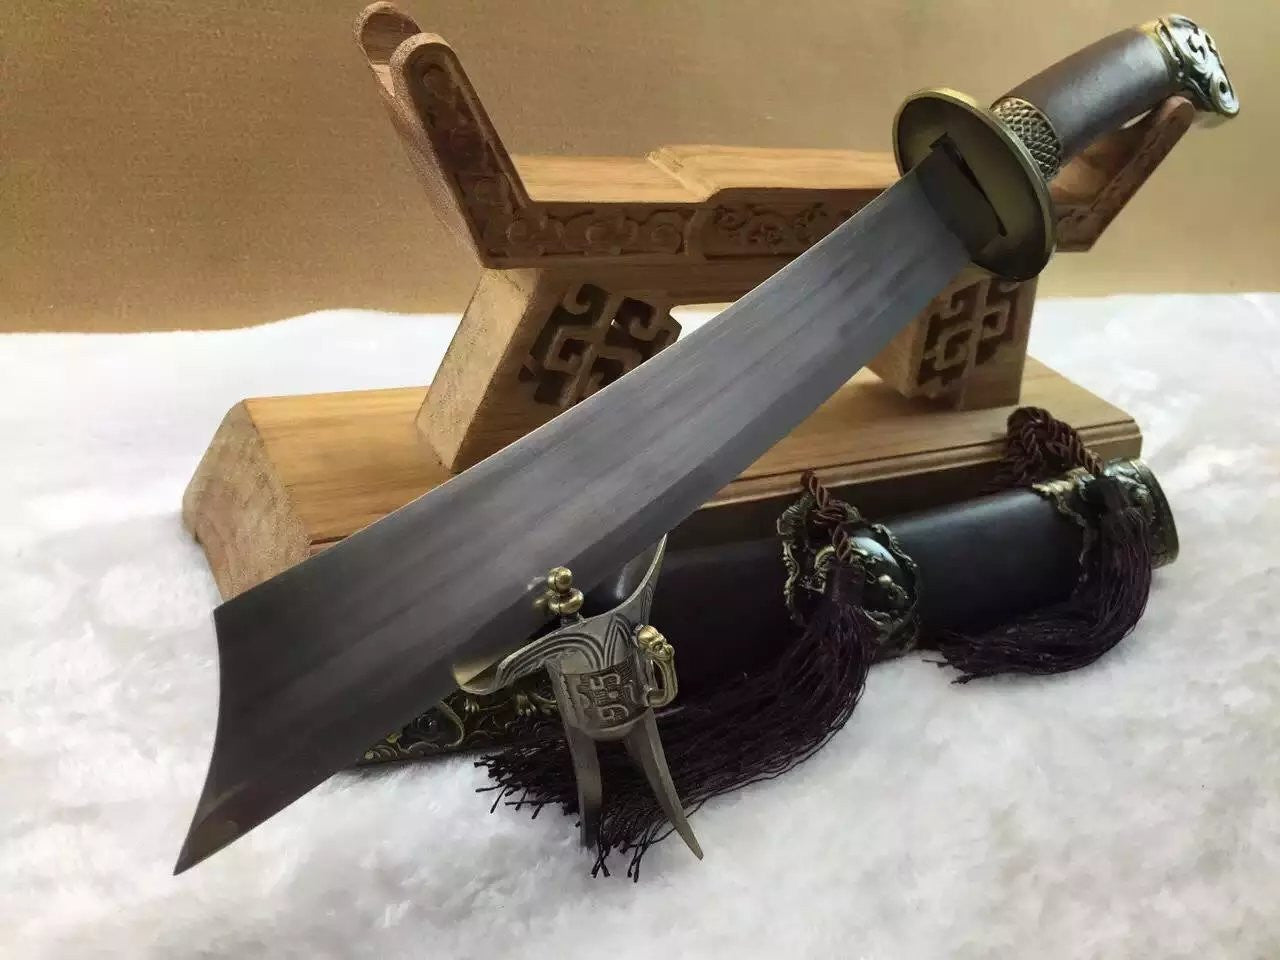 Dagger sword,High manganese steel,Rosewood scabbard,Alloy fitting,Length 20 inch - Chinese sword shop